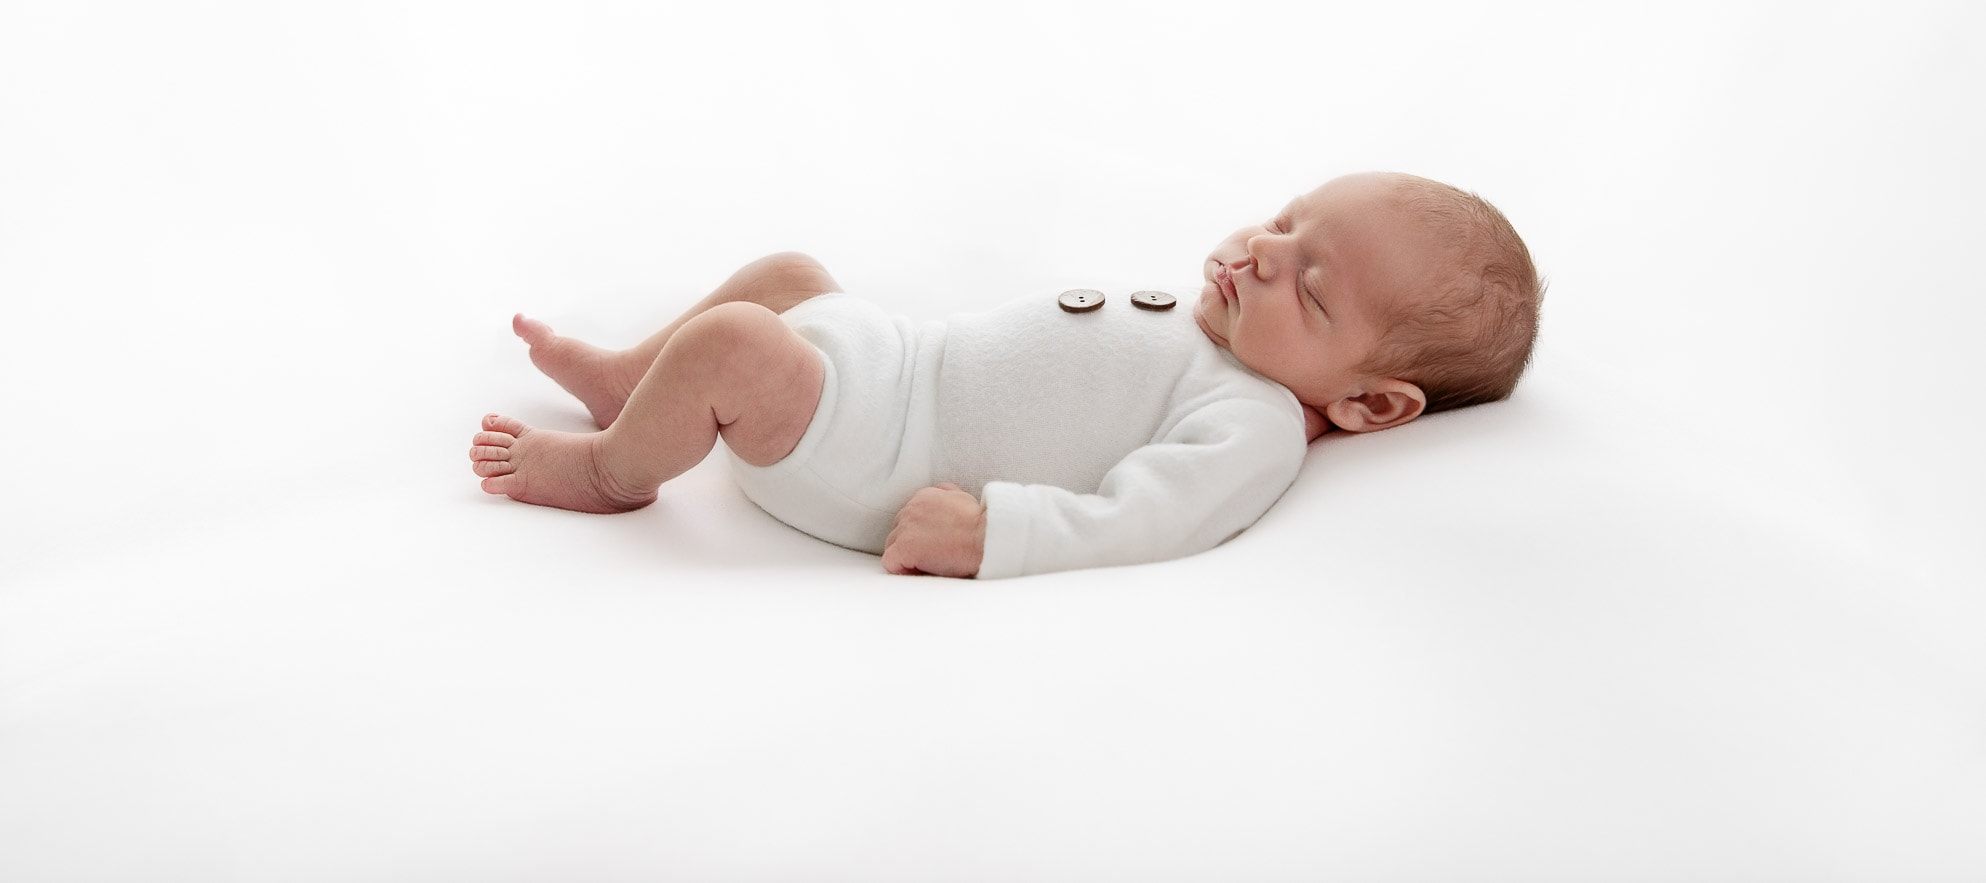 Backlit newborn baby boy sleeping on his back wearing a white romper on a white background